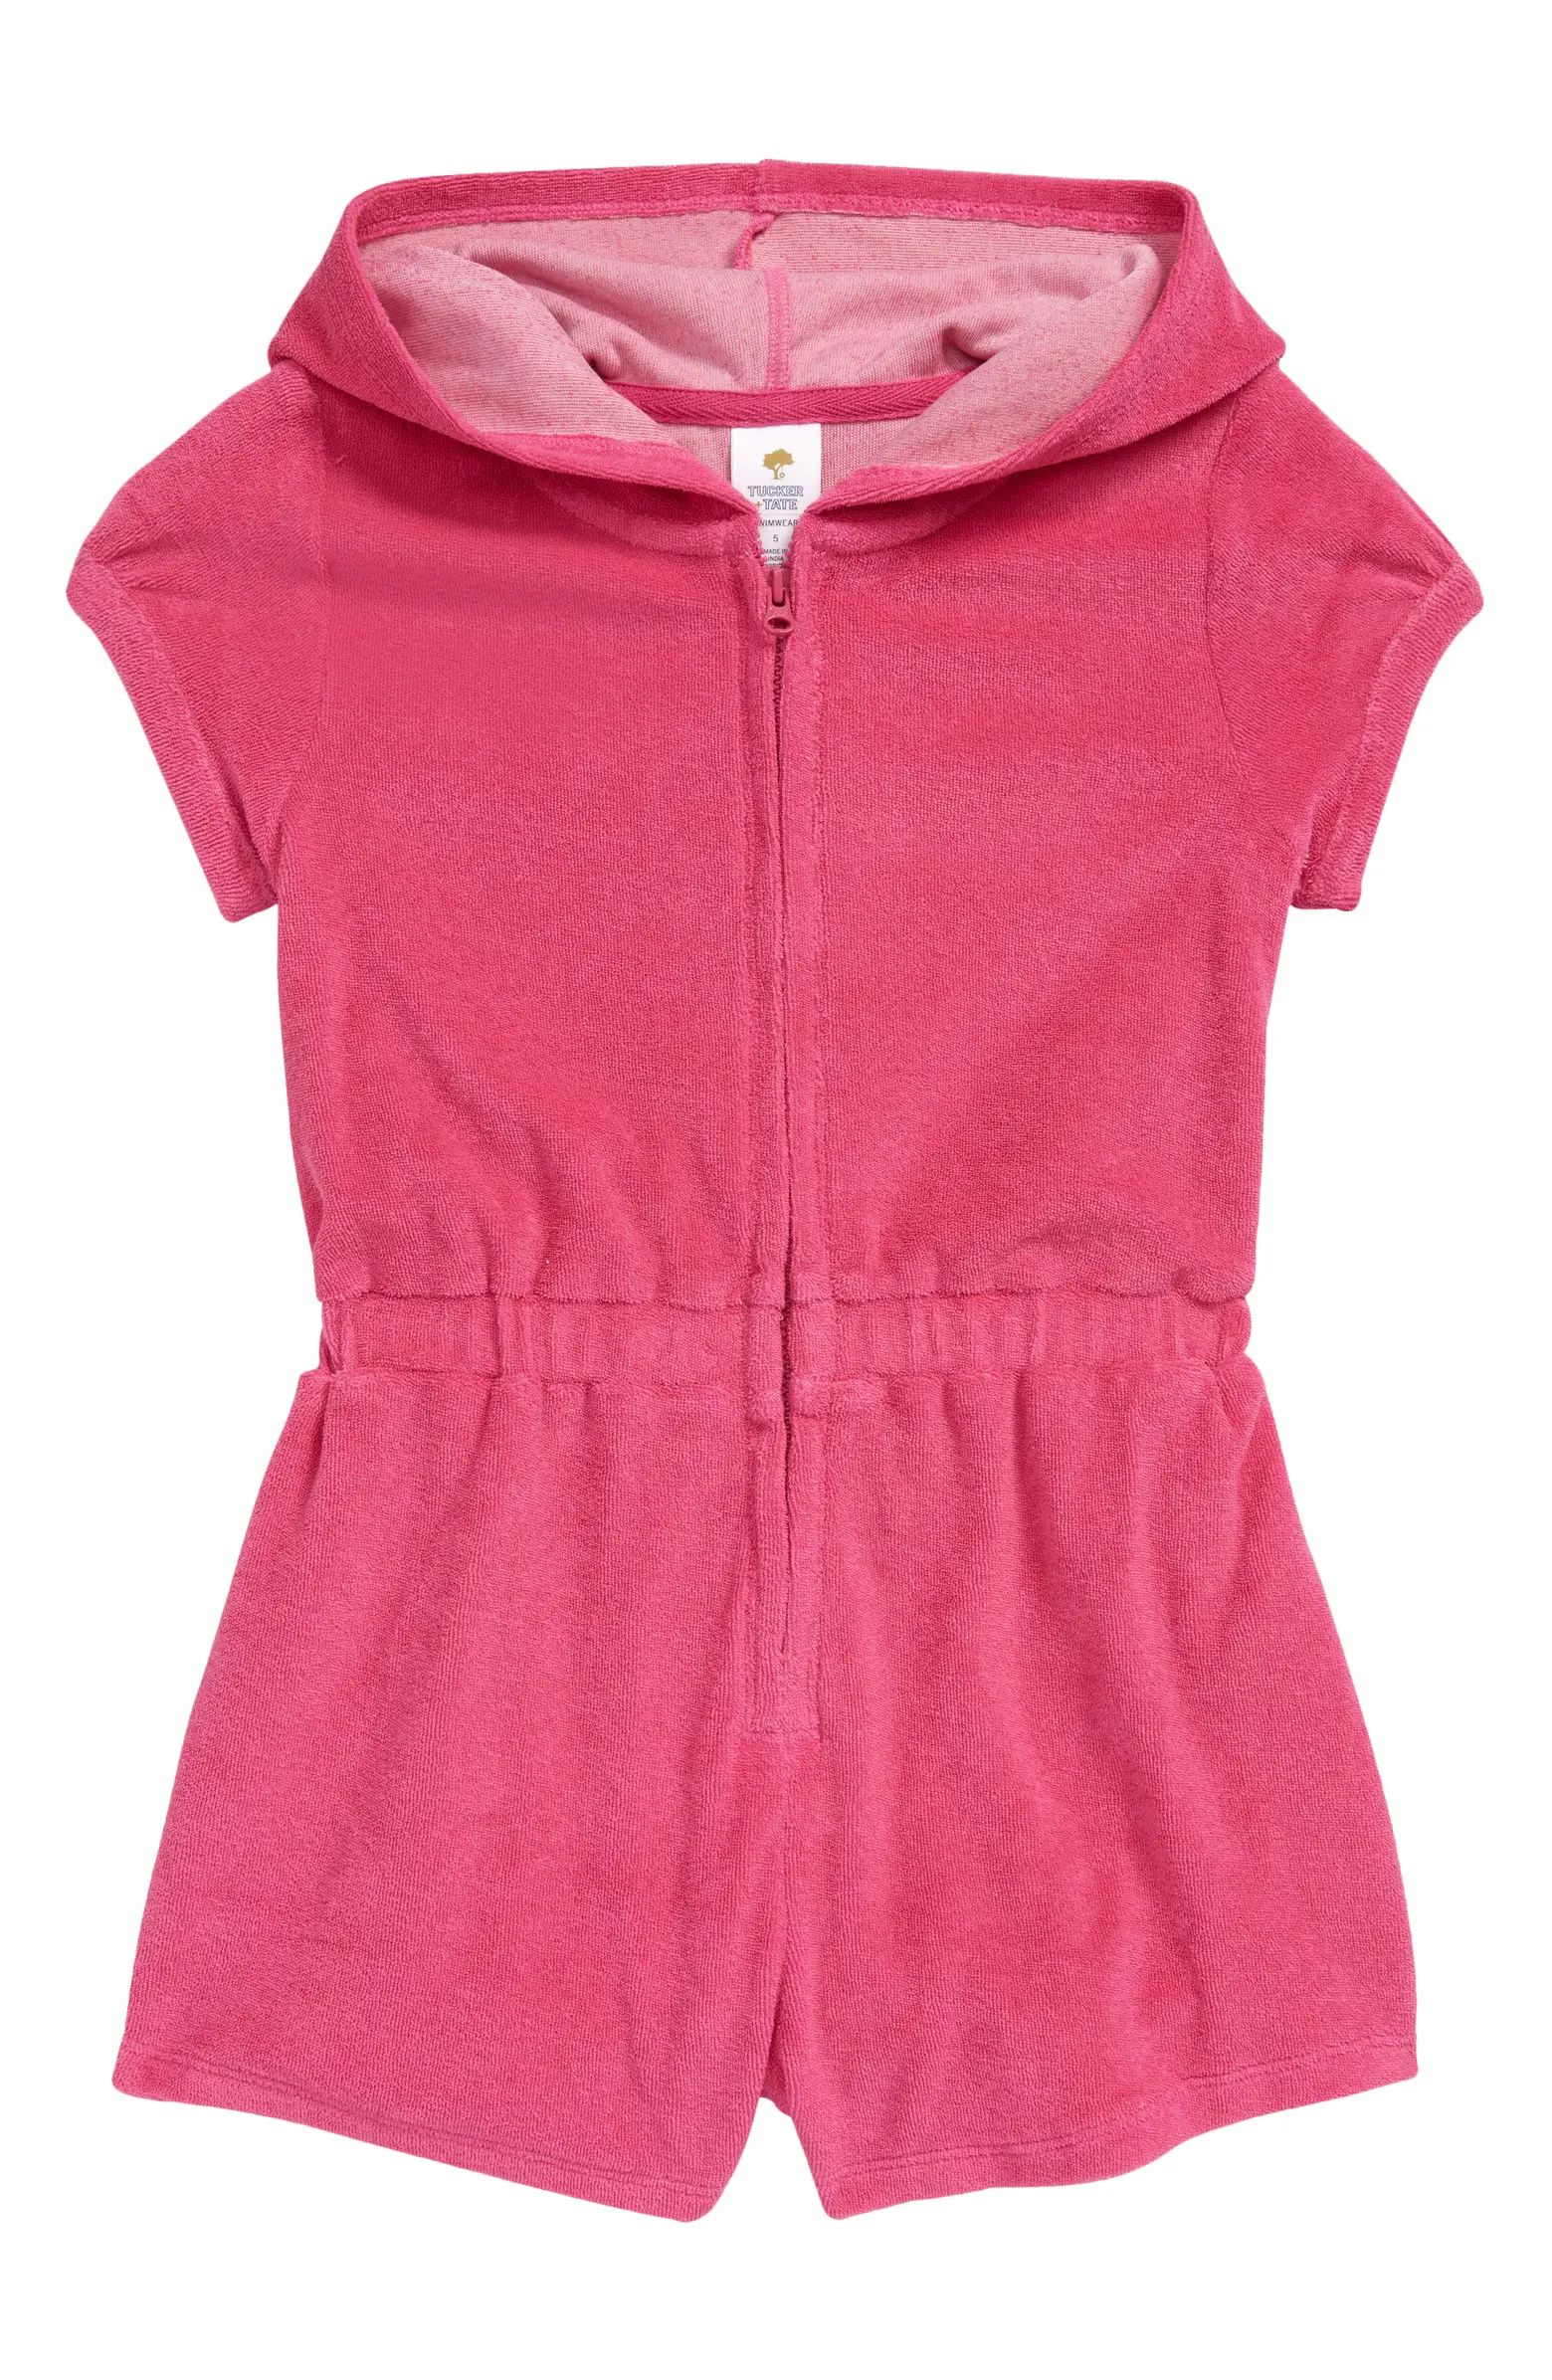 Kids' Terry Cover-Up Romper | Nordstrom